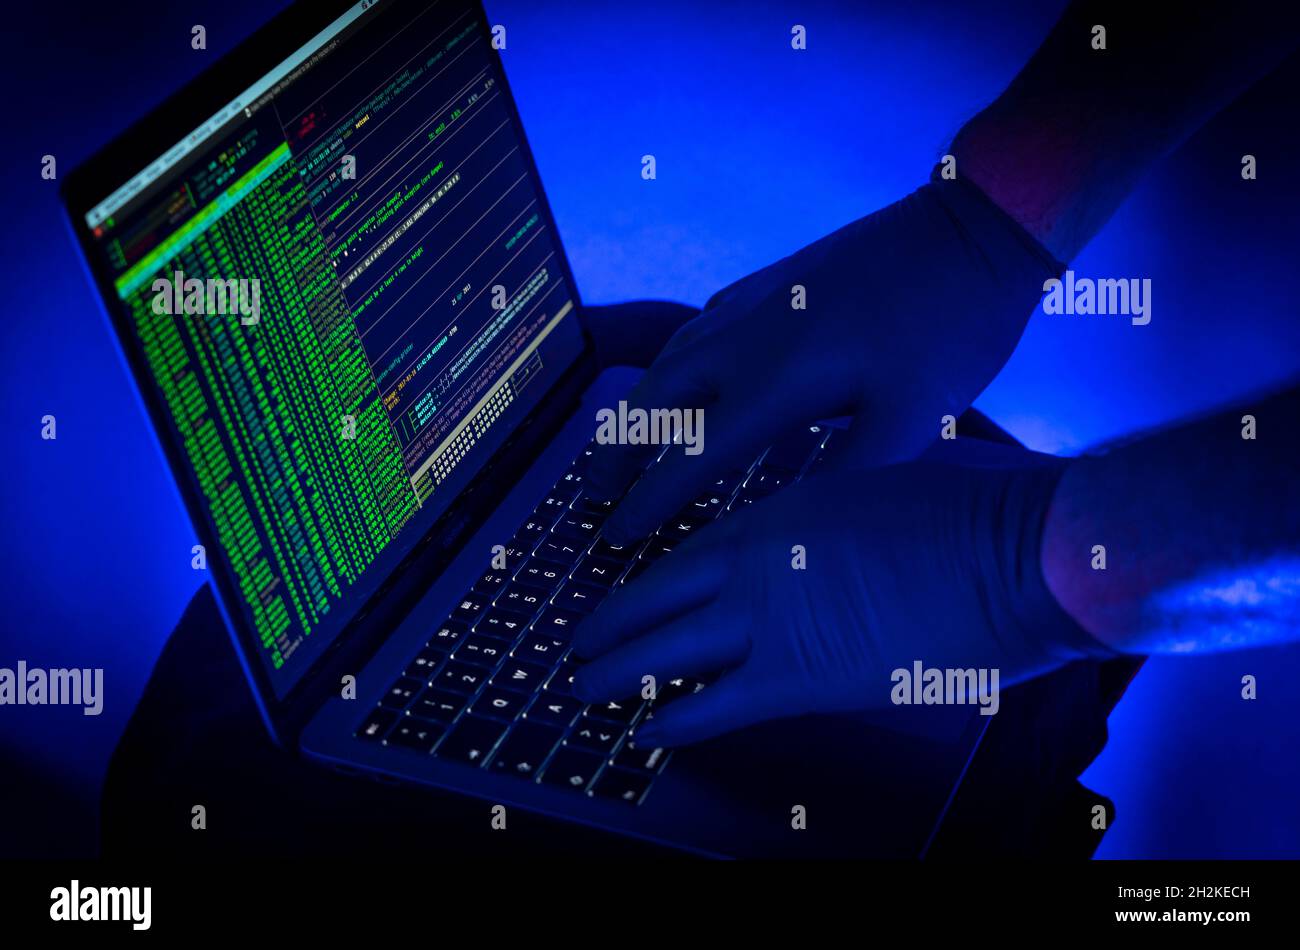 Symbolic image cyber attack, computer crime, cybercrime, computer hackers attack a network, computer, IT infrastructure Stock Photo